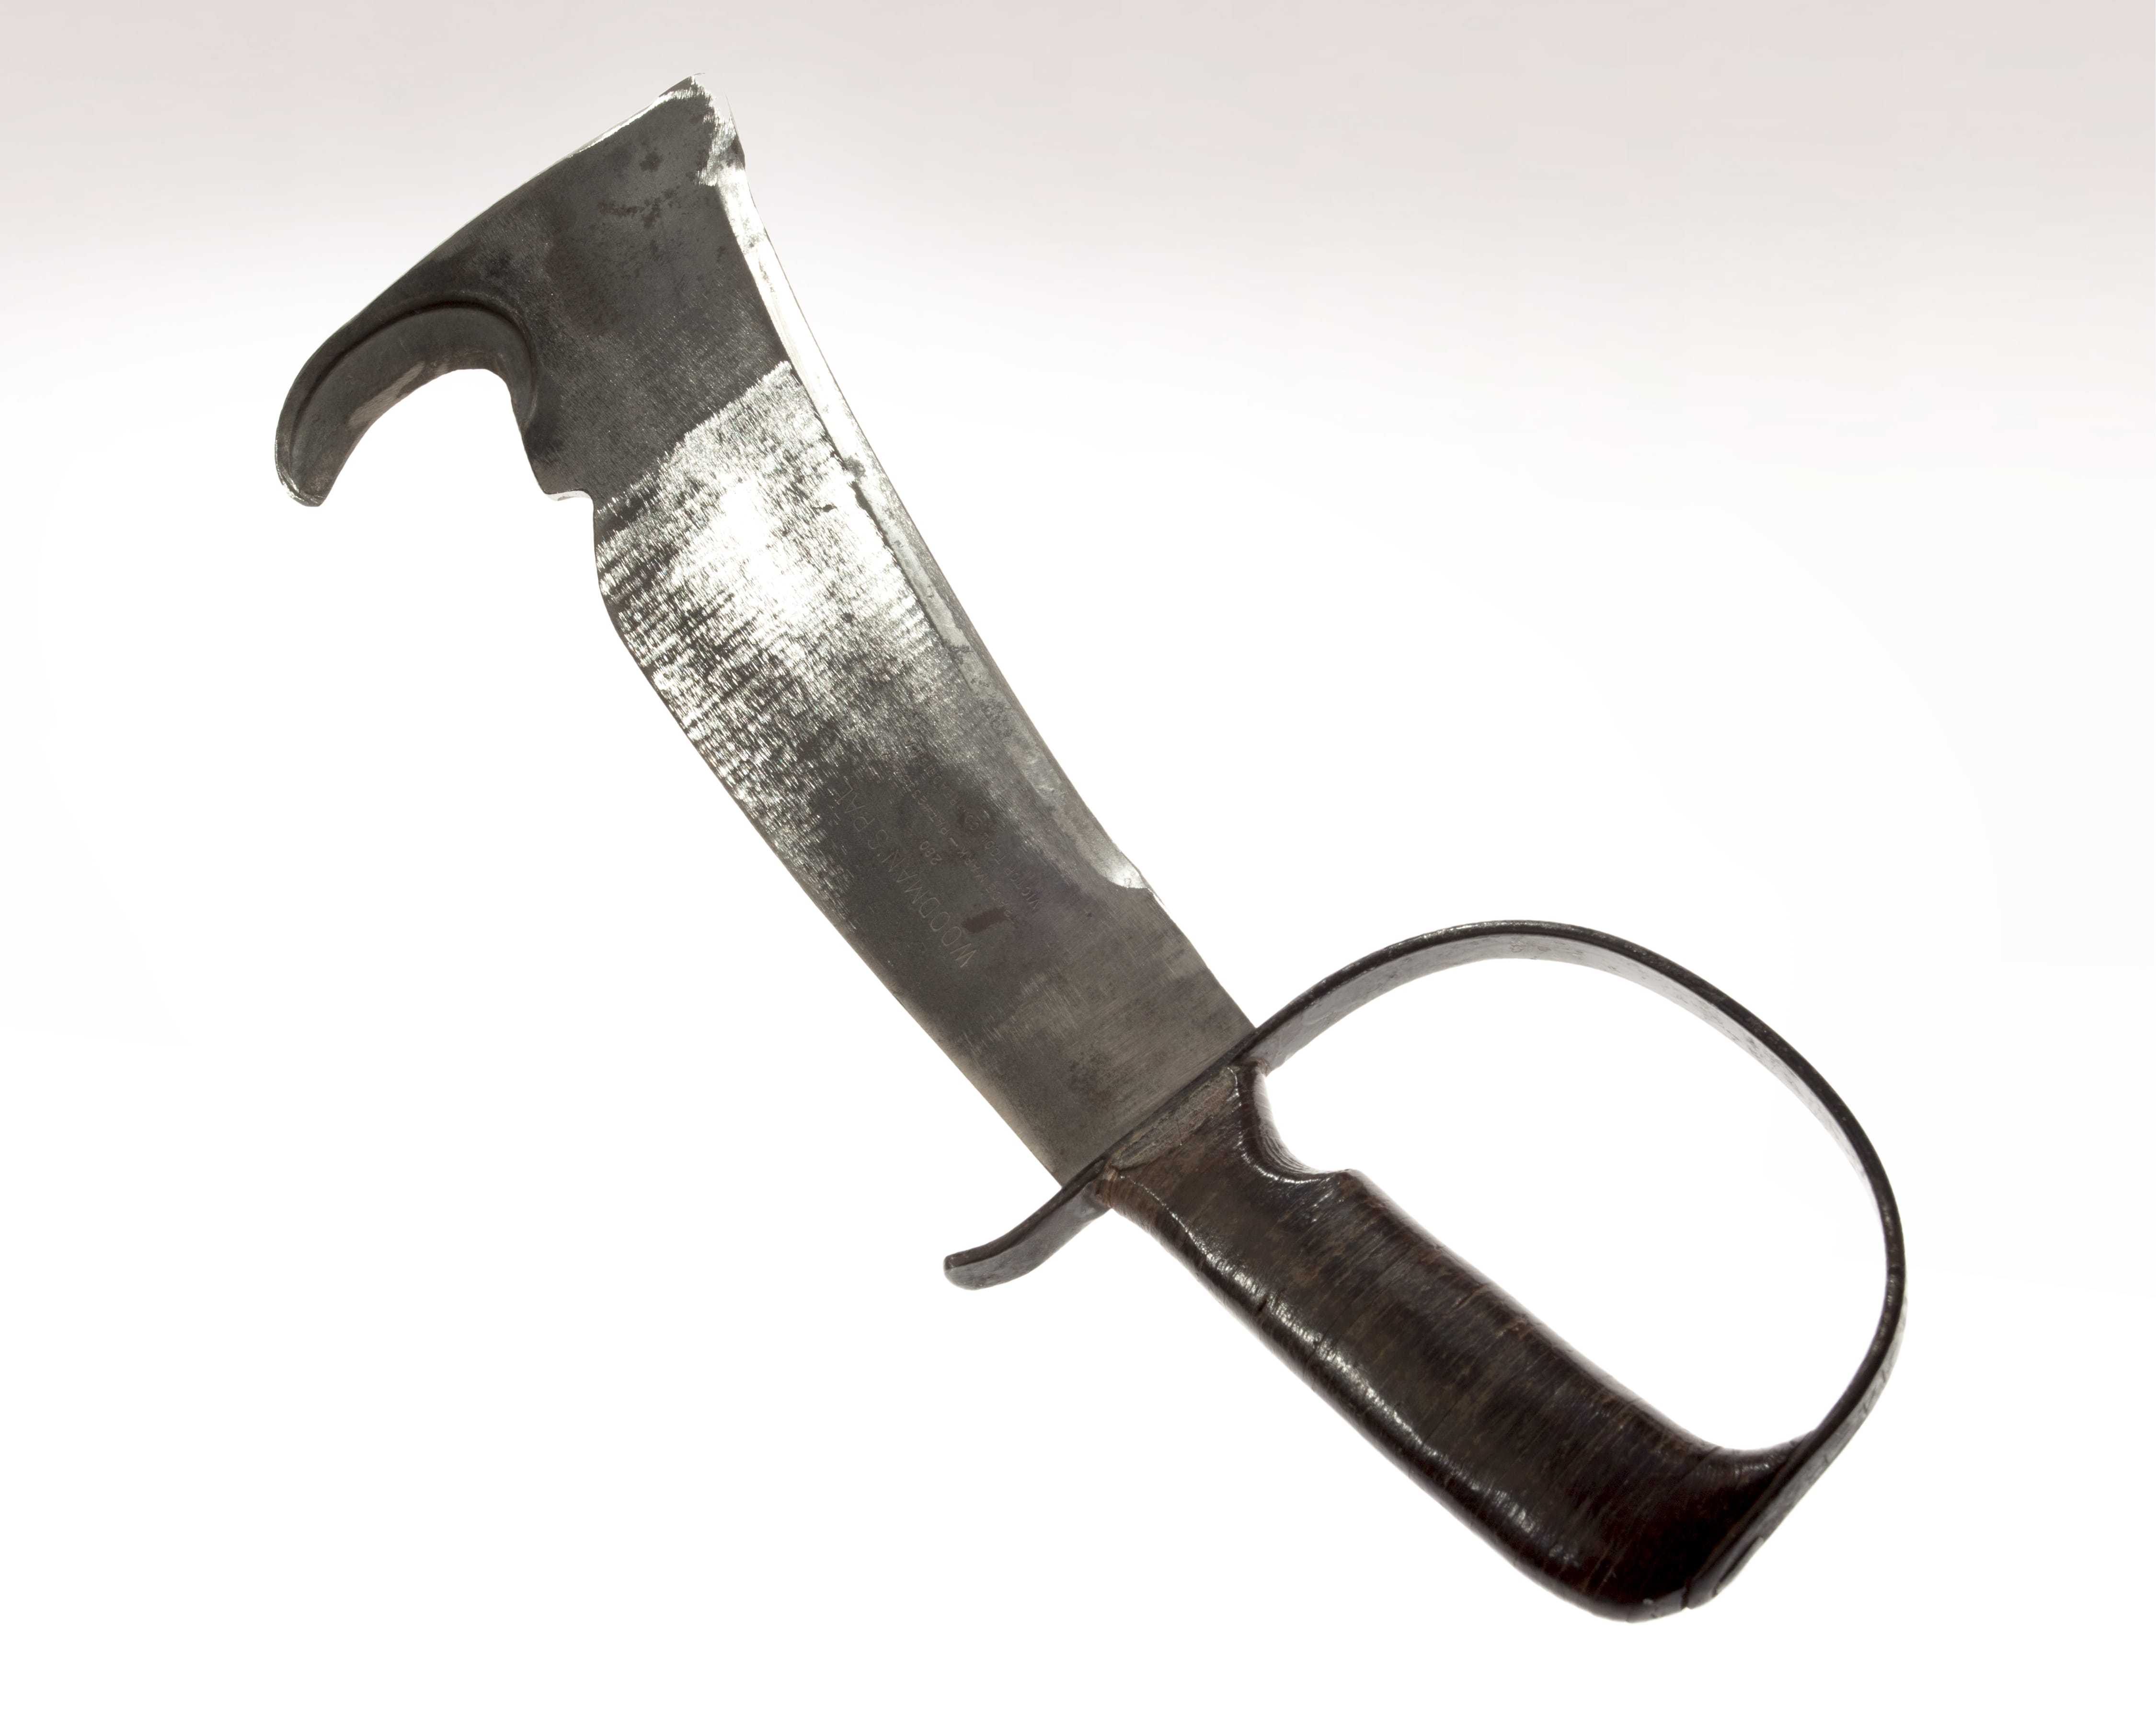 A knife with a wide blade and a blunt end that wraps into a hook